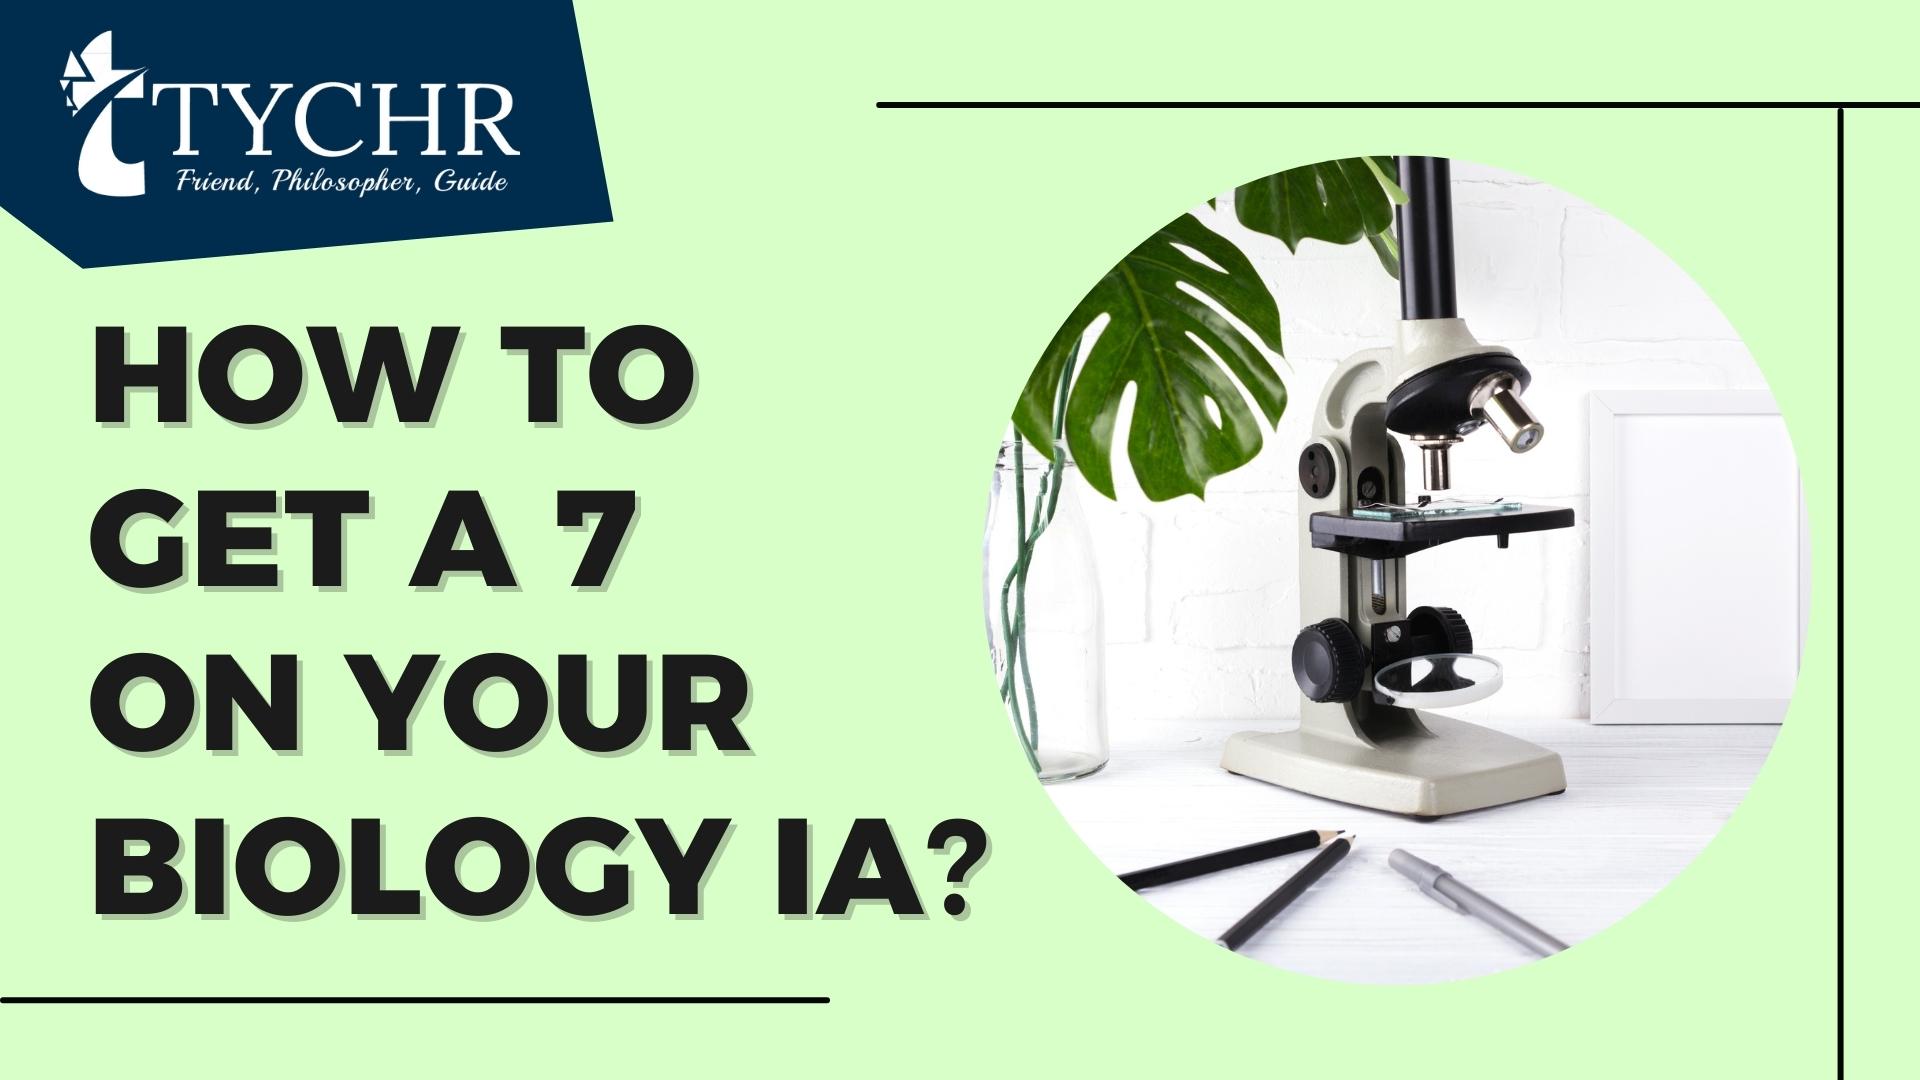 How to get a 7 on your Biology IA (Internal Assessment)